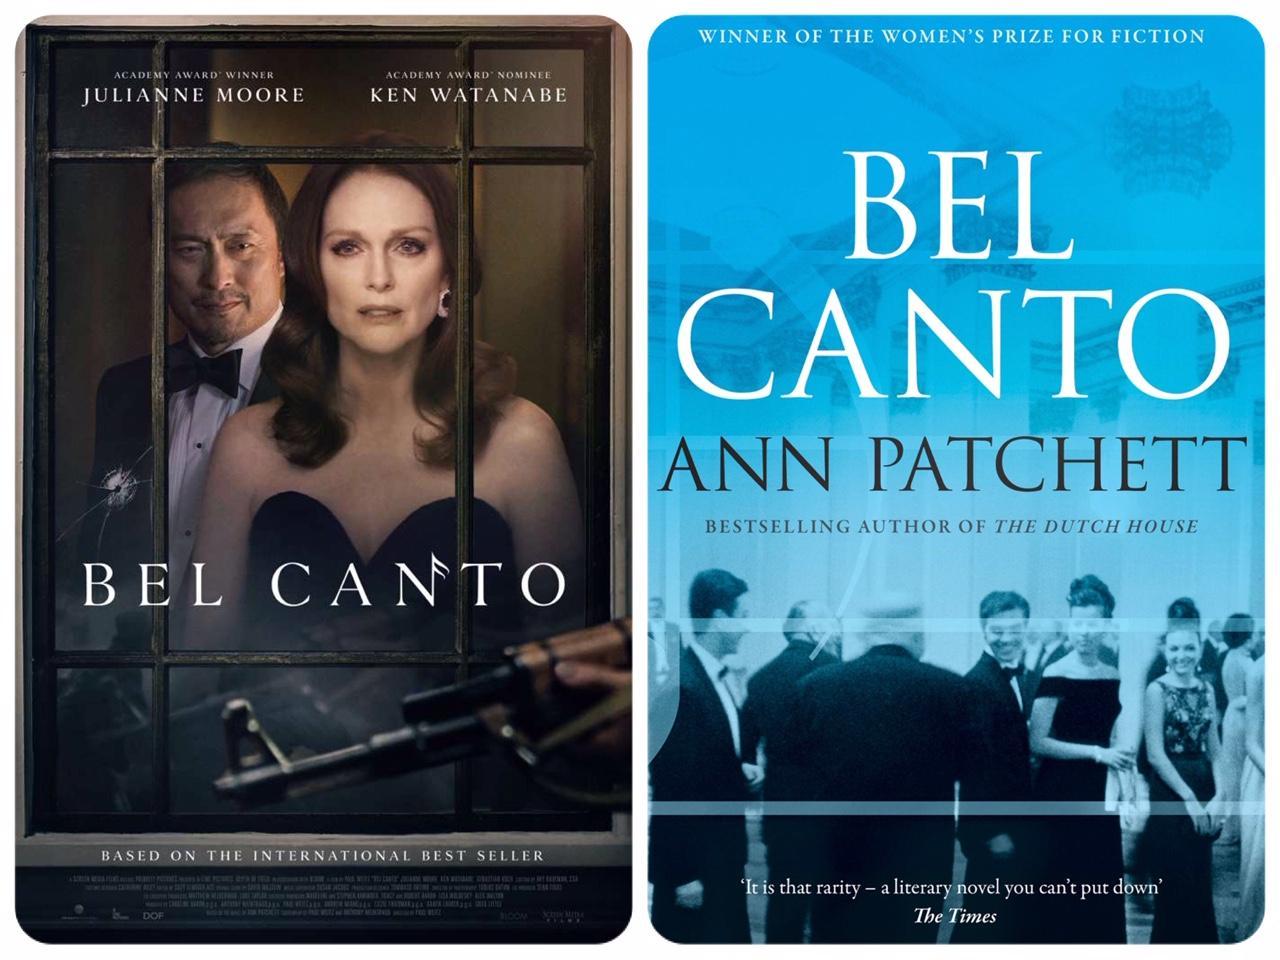 5.BEL CANTO